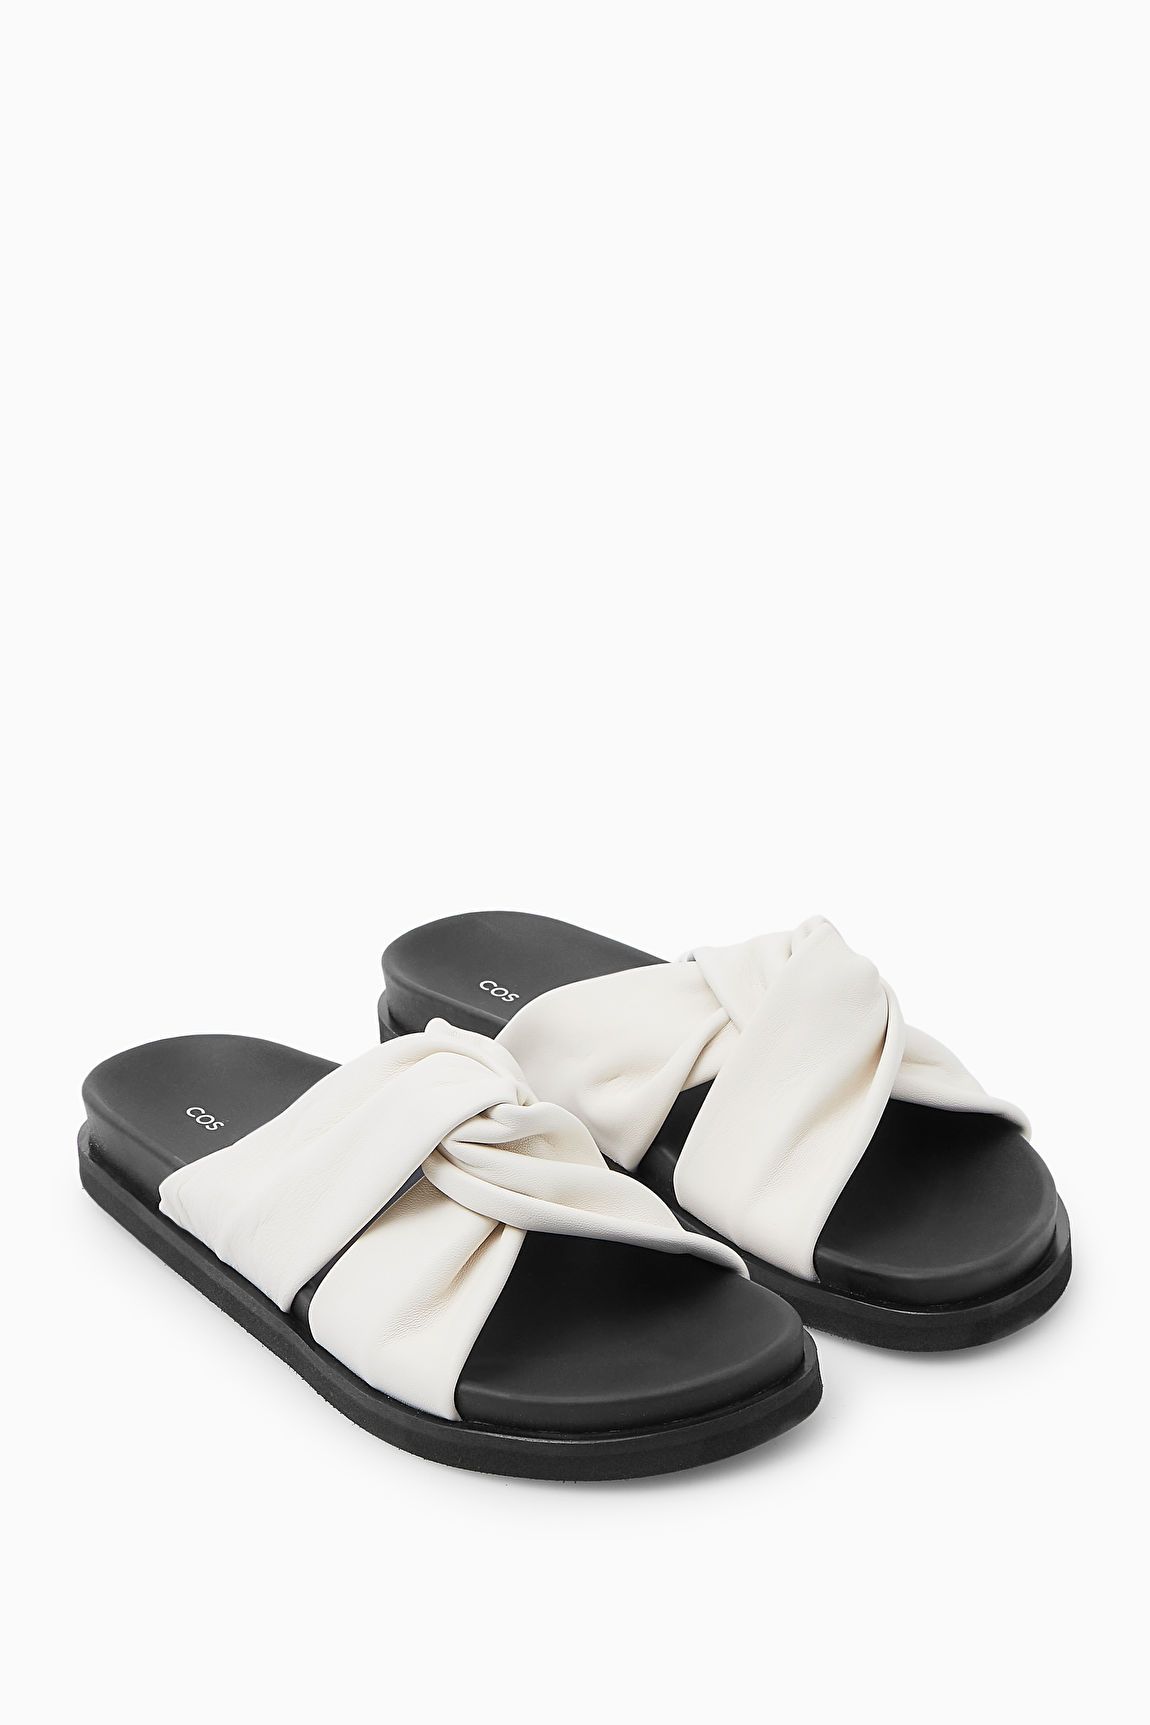 CROSSOVER LEATHER SLIDES | COS UK